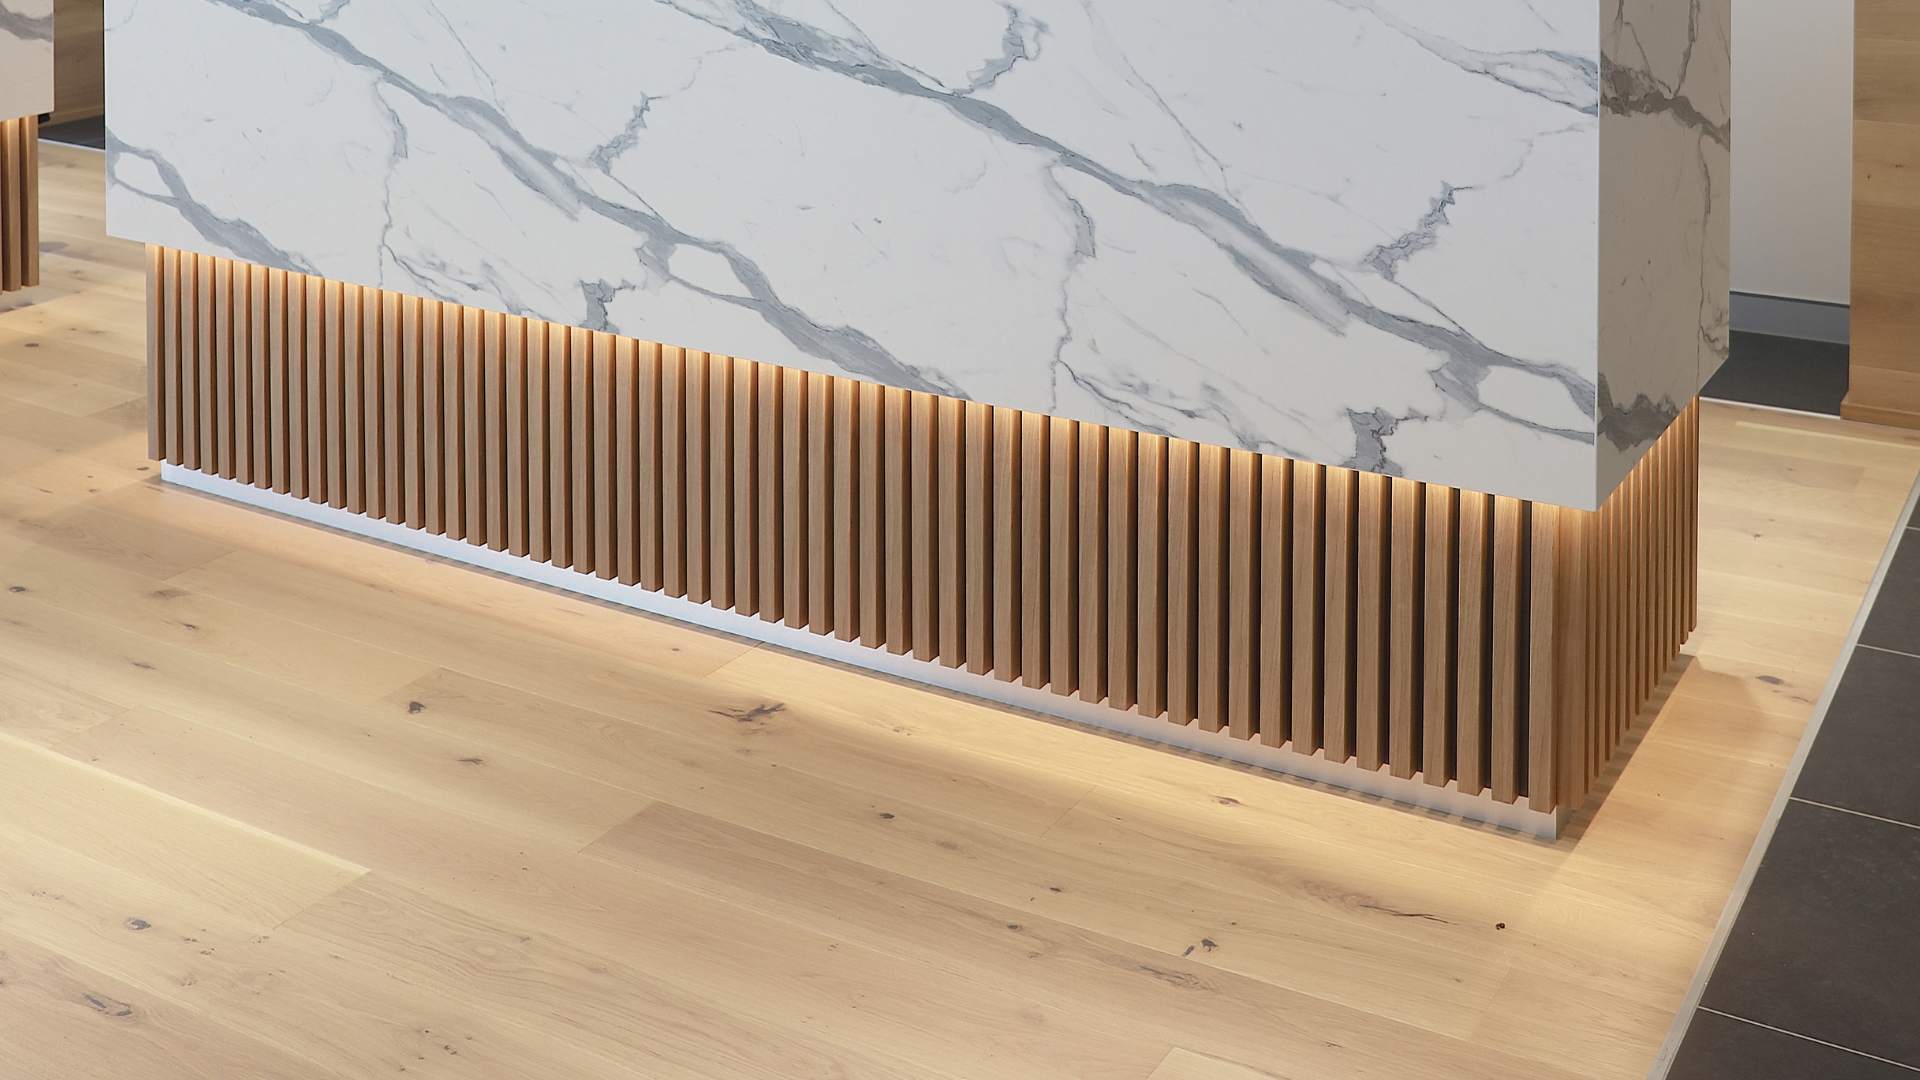 Decorative Battens: Turn ordinary spaces into extraordinary ones.